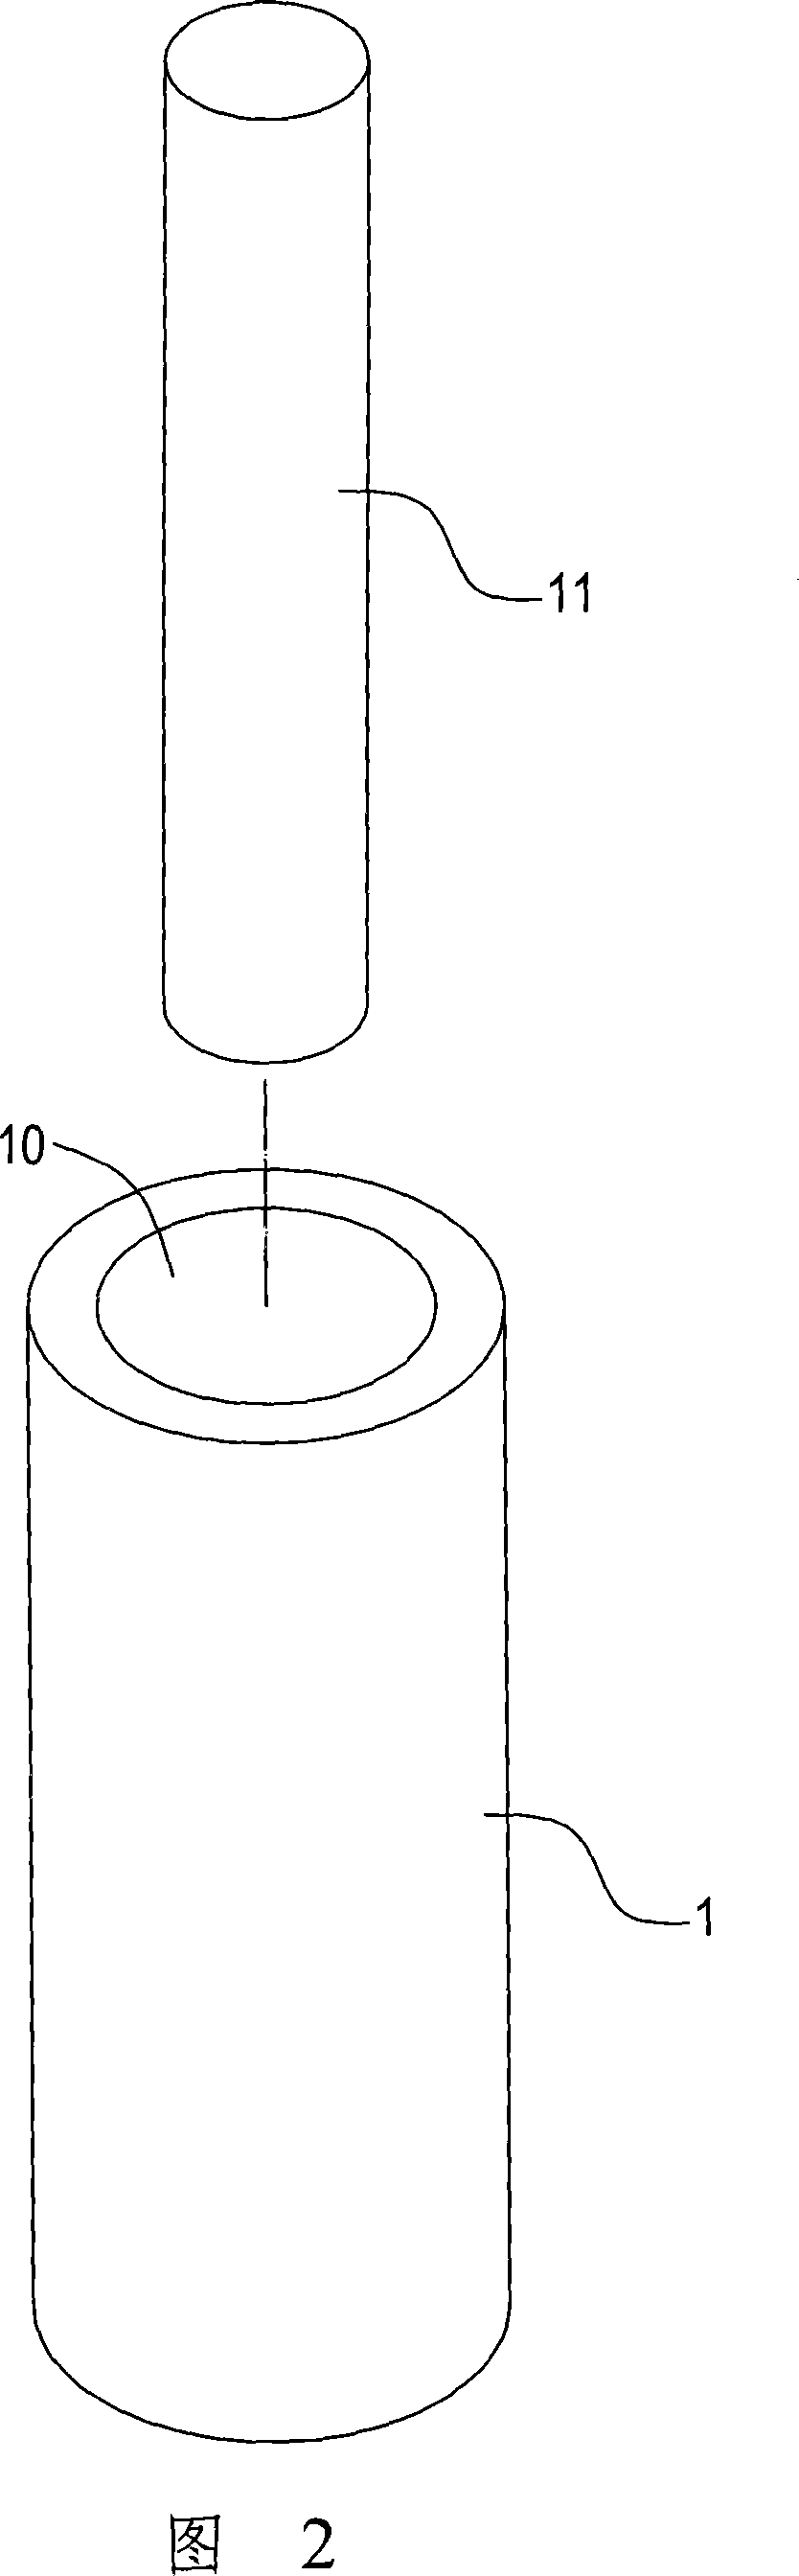 Heat-conducting plate with wick supporting structures and method for manufacturing same